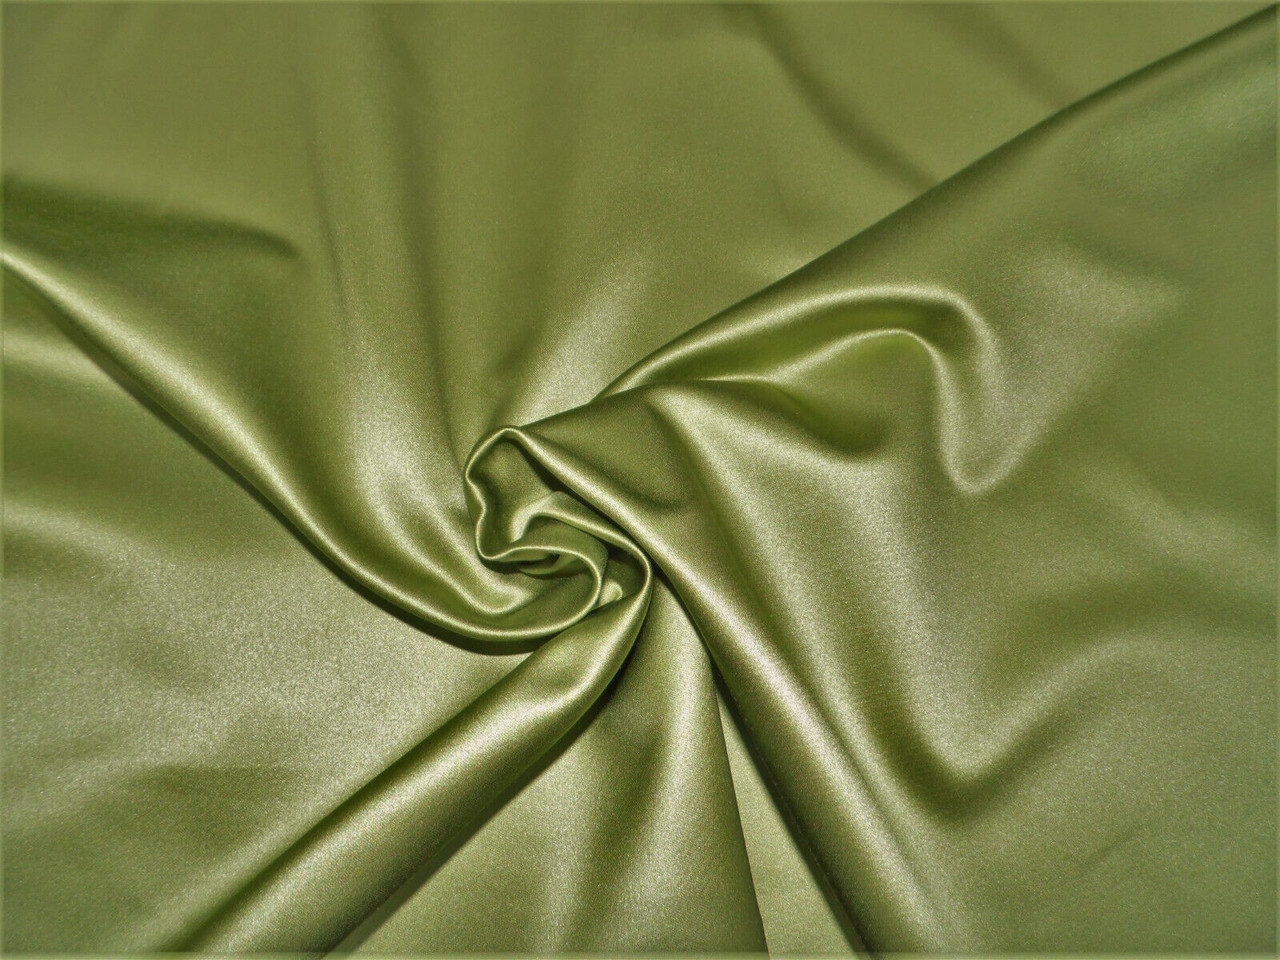 Heritage Fabrics Sateen Cotton Blend Fabric Emory Chive Green